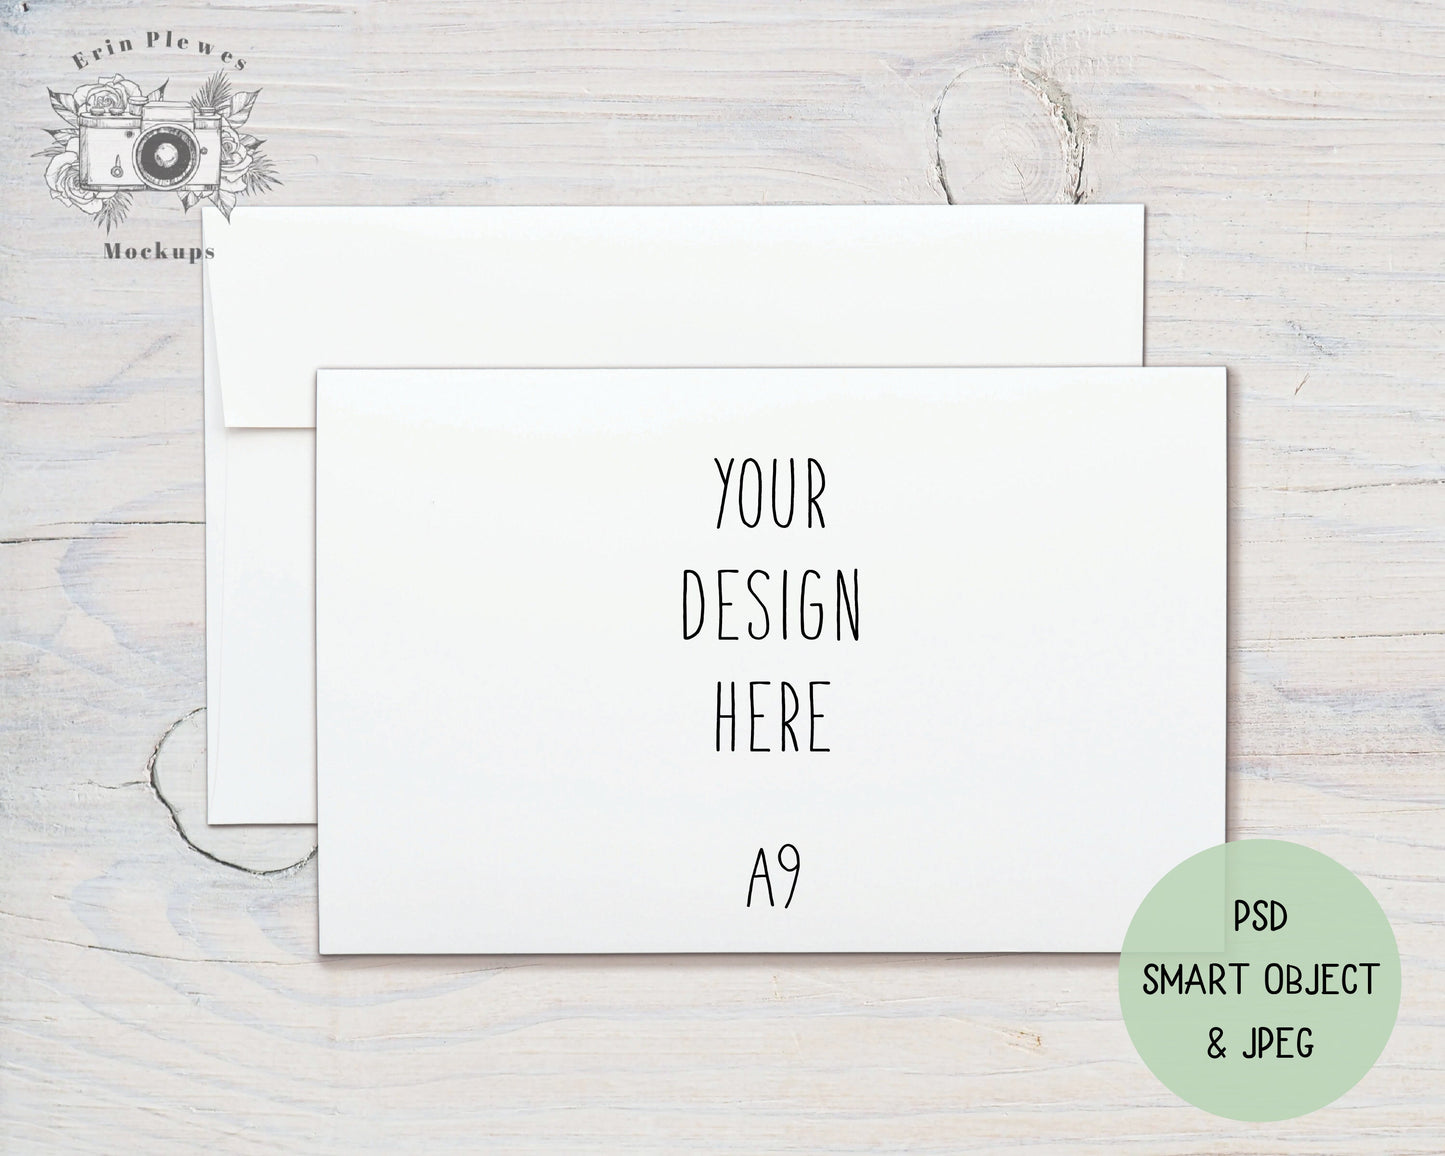 Card Mockup A-9, A9 Card Mock Up PSD Smart Object, 5.5" x 8.5" Greeting Card with Envelope Mock-up, Jpeg Instant Digital Download Template